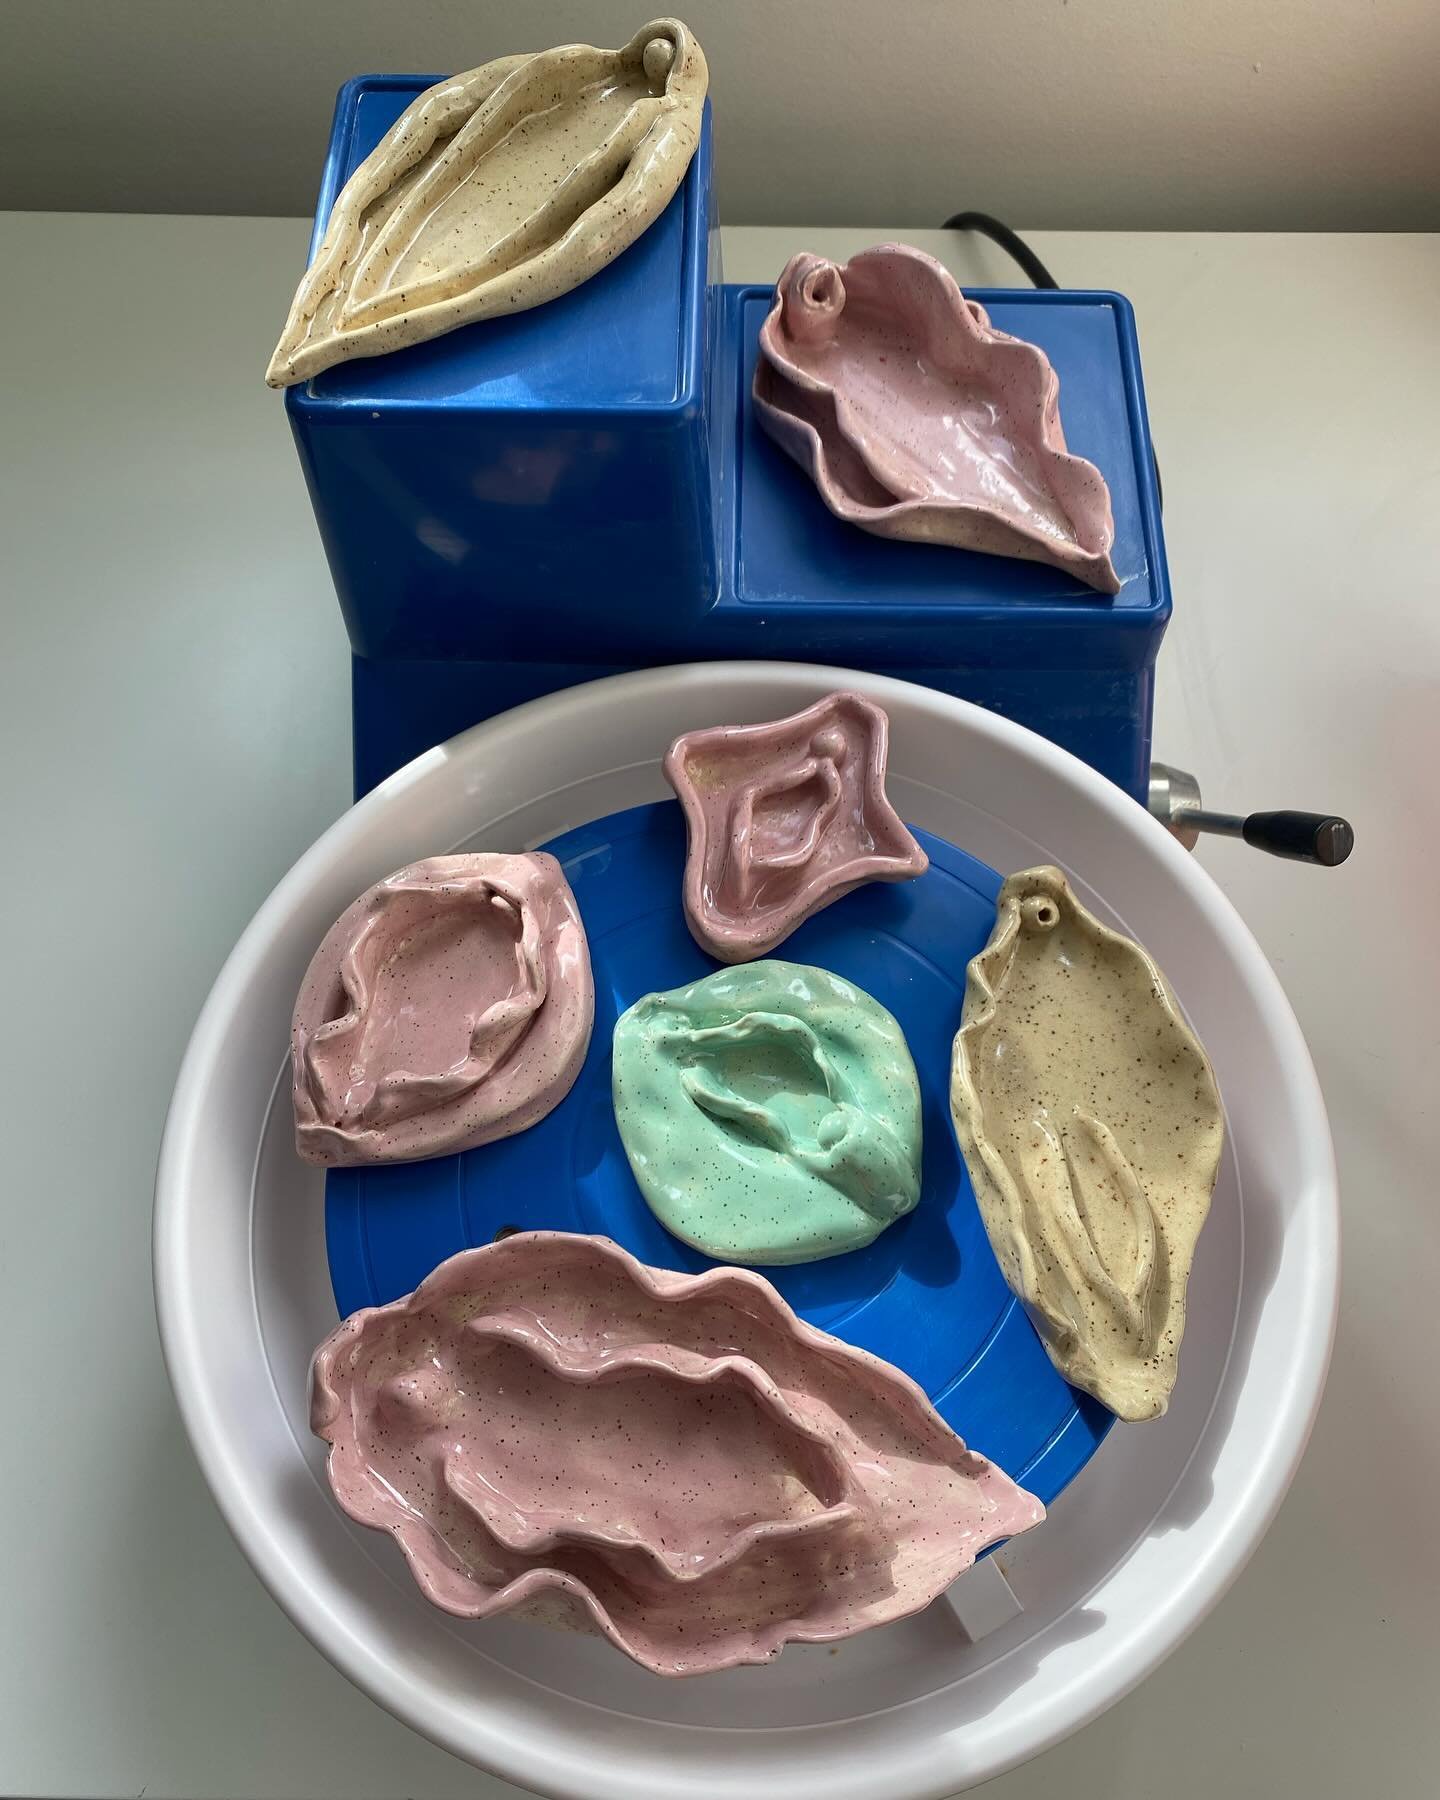 After ➡️ before. I cannot take credit for these, they were made by talented participants in our vulva gazing and sculpting workshop! 🌷🪞💫 @chloeskerlak